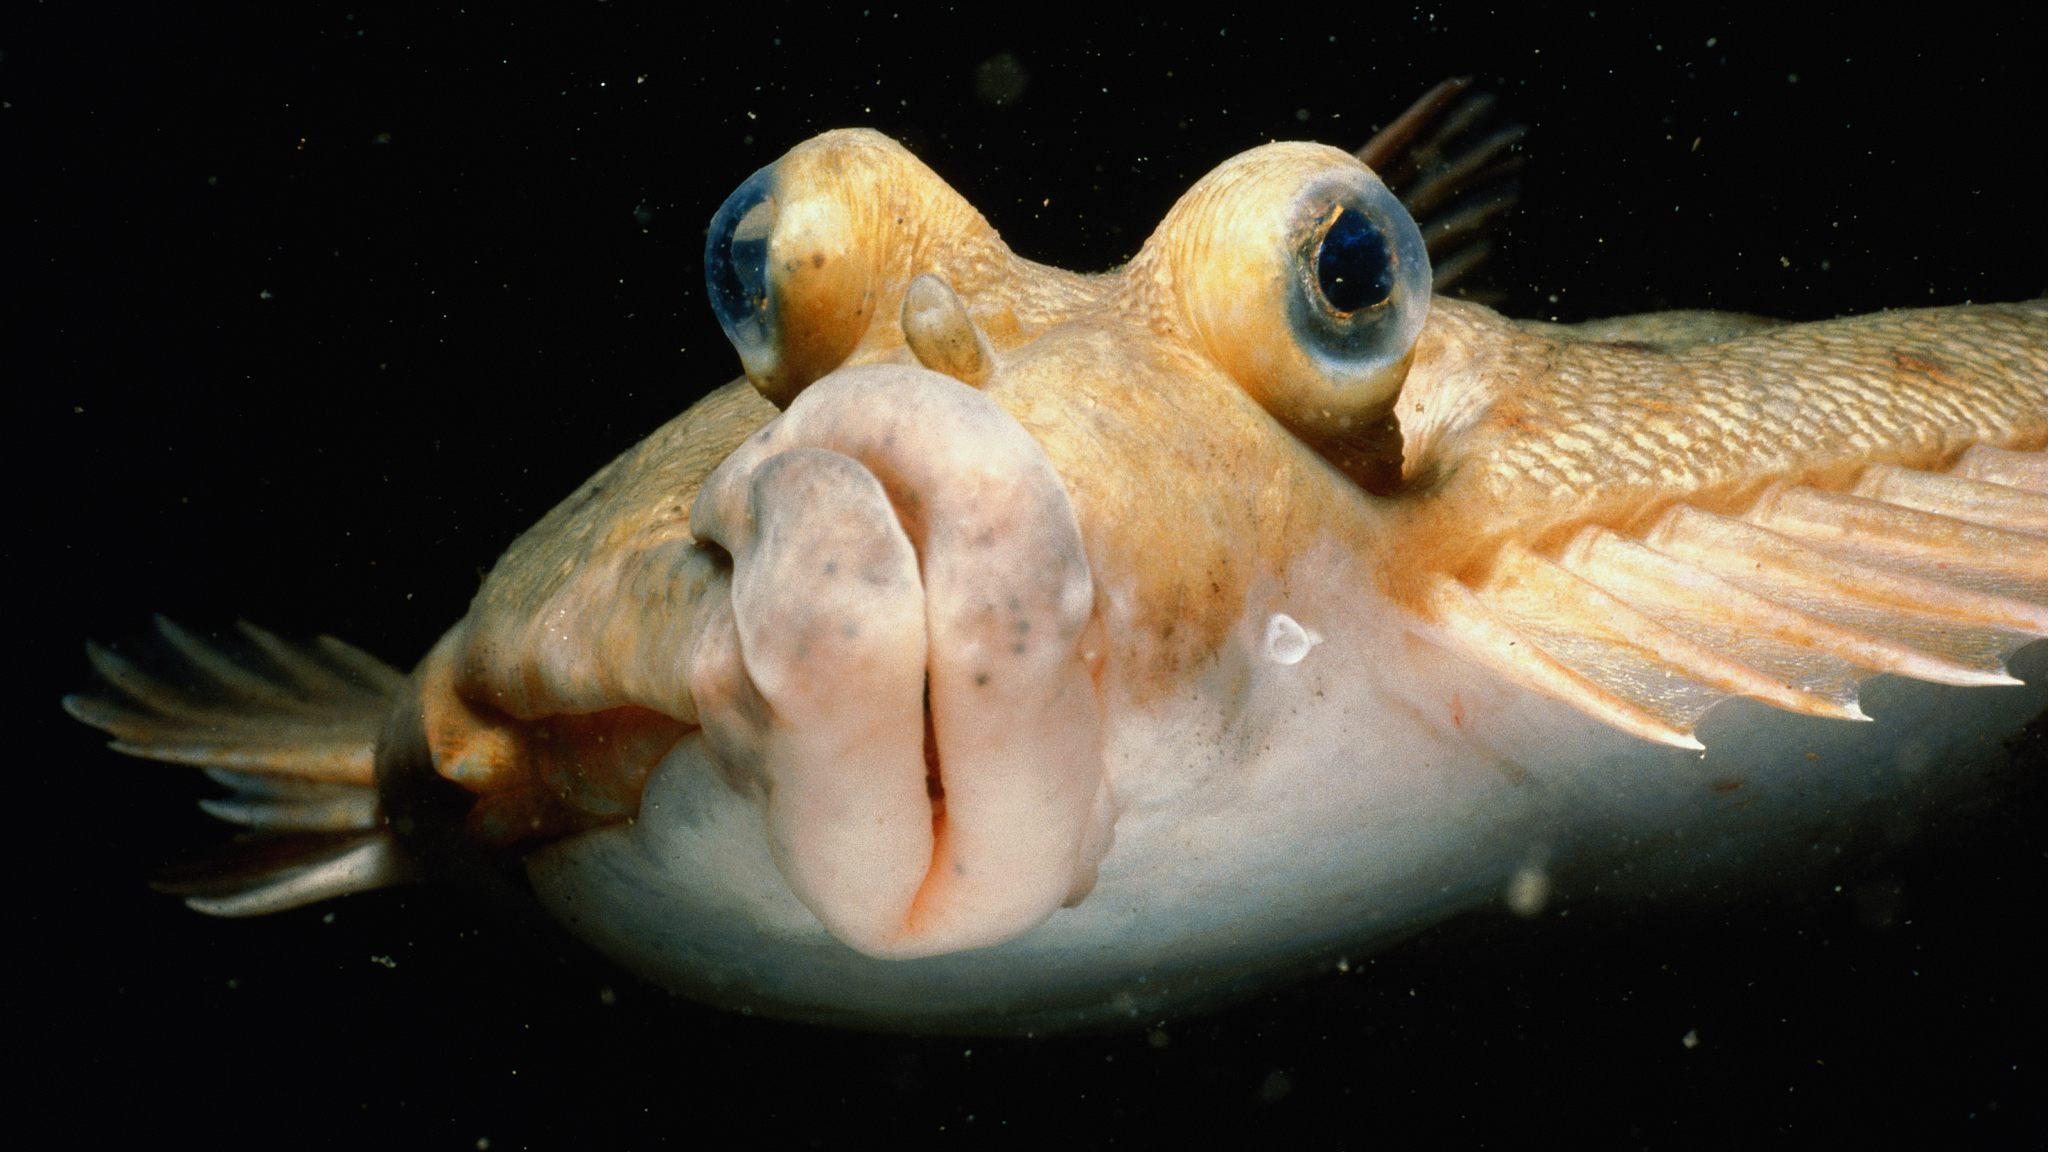 The walking fish: Flatfish use their fins to move around the seafloor